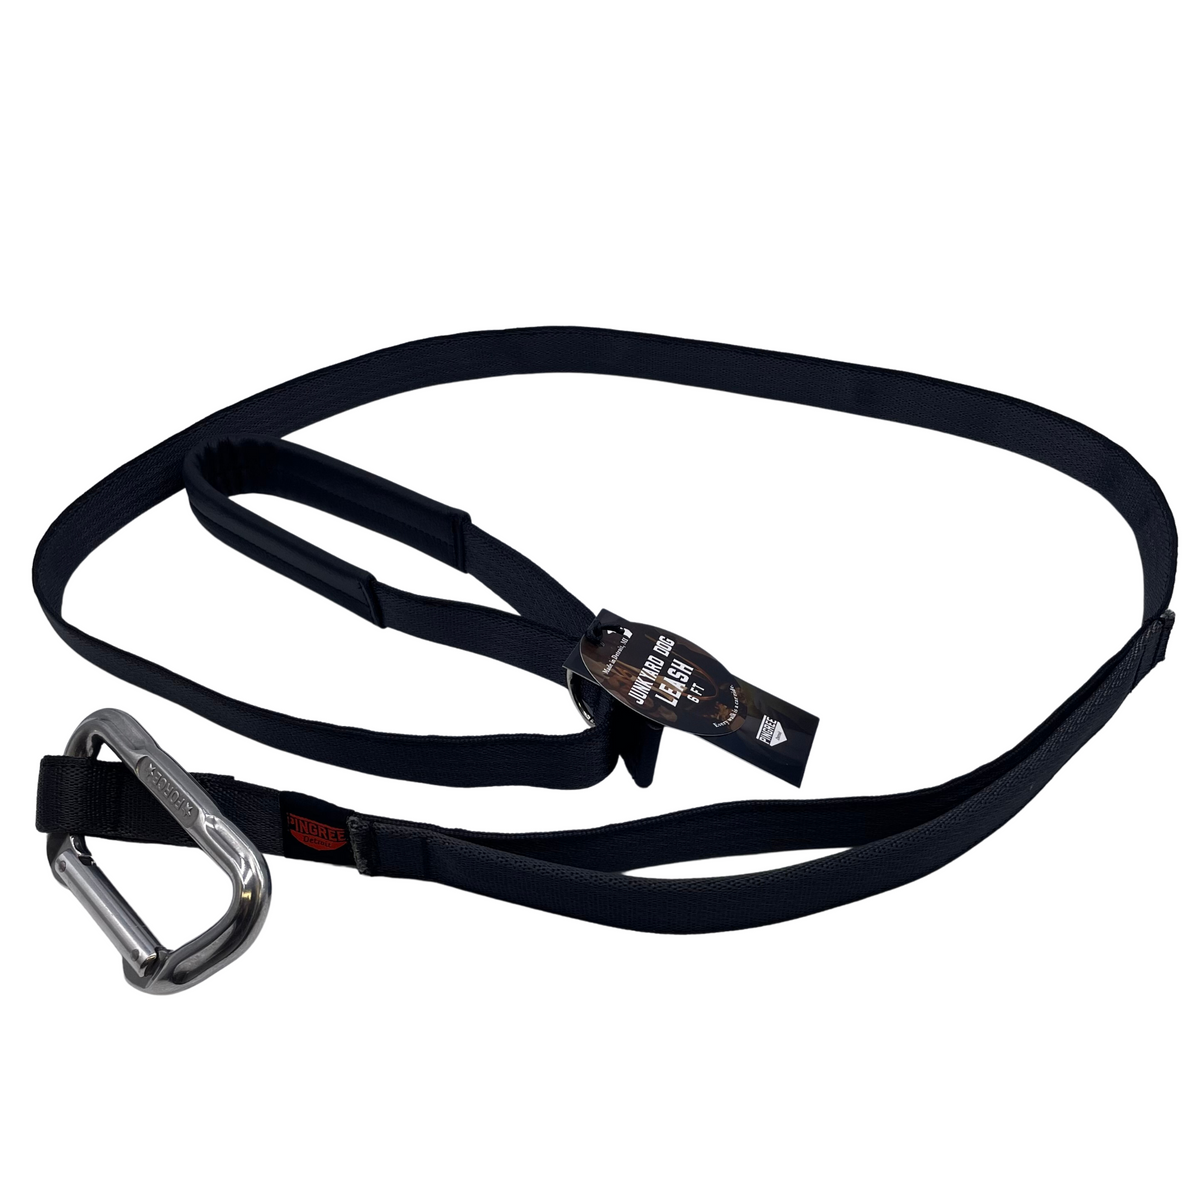 Mountain Dog Products Carabiner Clip Dog Leash, Assorted Colors, 10-ft